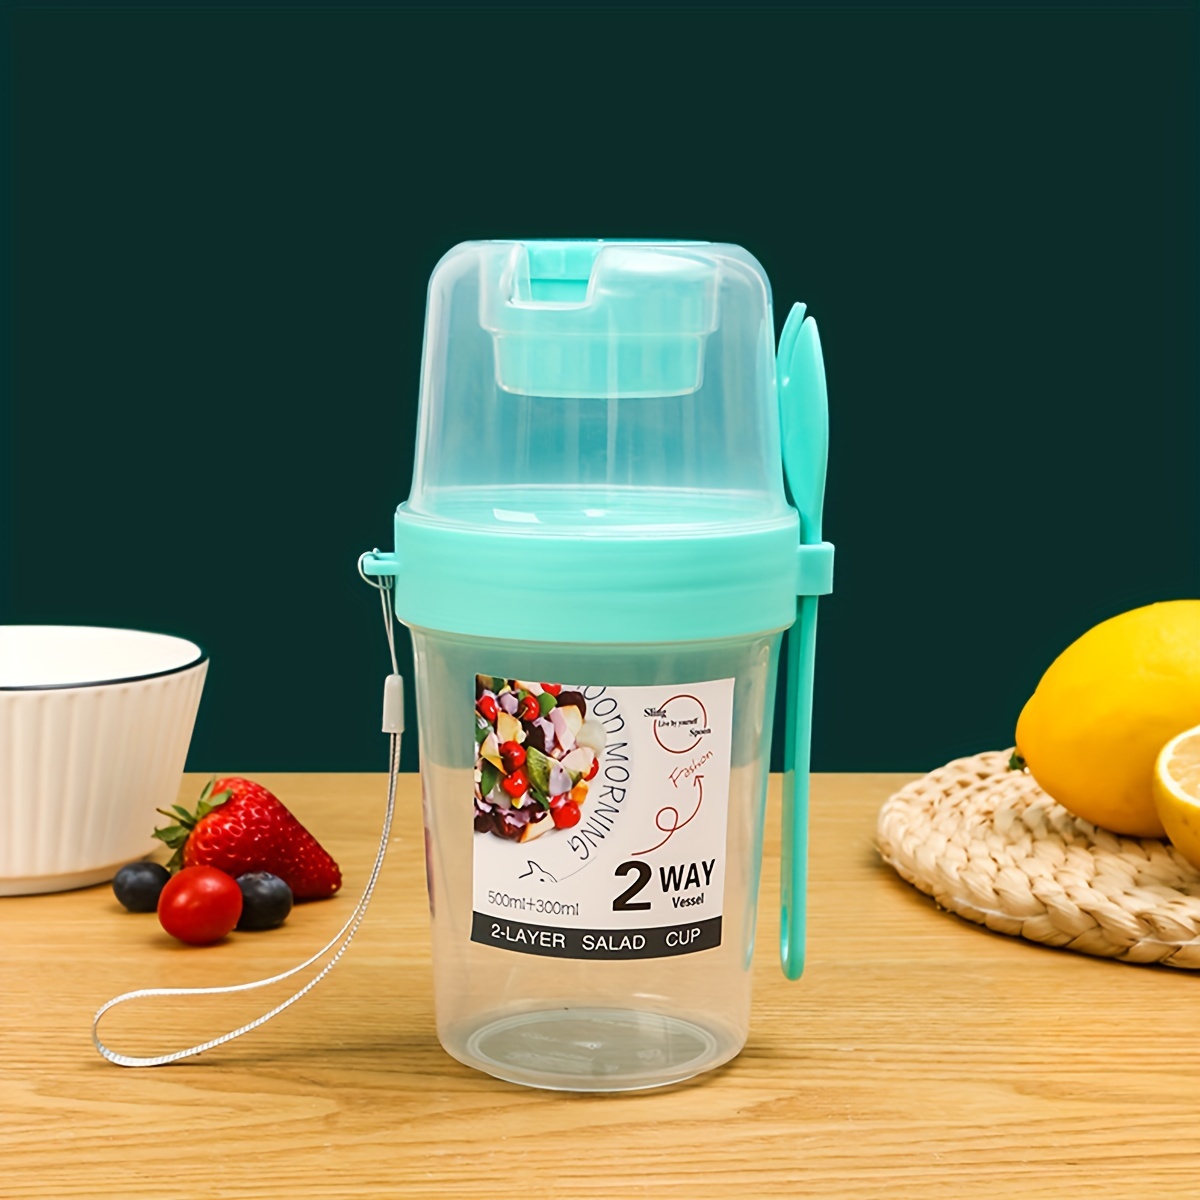 Salad Cup, Salad Meal Shaker Cup, Plastic Healthy Salad Container Wih Fork, Salad  Dressing Holder, Salad Cup For Picnic Lunch Breakfast, Salad Cup With Lid,  Portable Salad Cup For Outdoor, Kitchen Stuff 